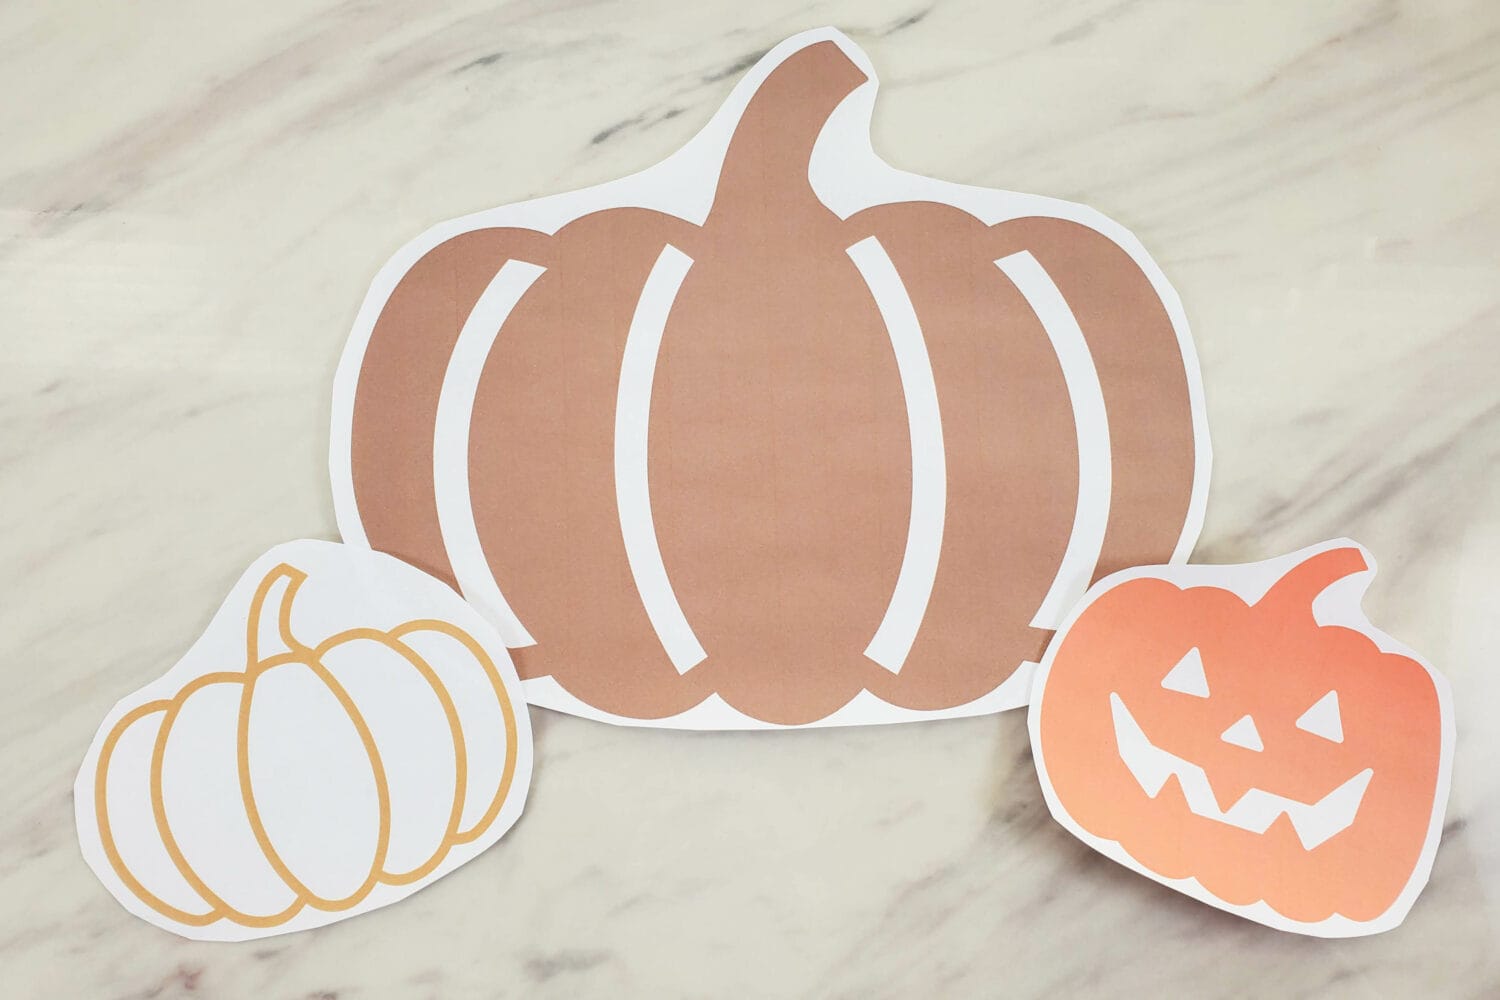 Fall & Halloween Pumpkin Patch Game printable activity for Singing Time! 6 fun ways to use our cute pumpkin printables or mini pumpkins as a learning activity for teaching music ideas for LDS Primary Music Leaders.